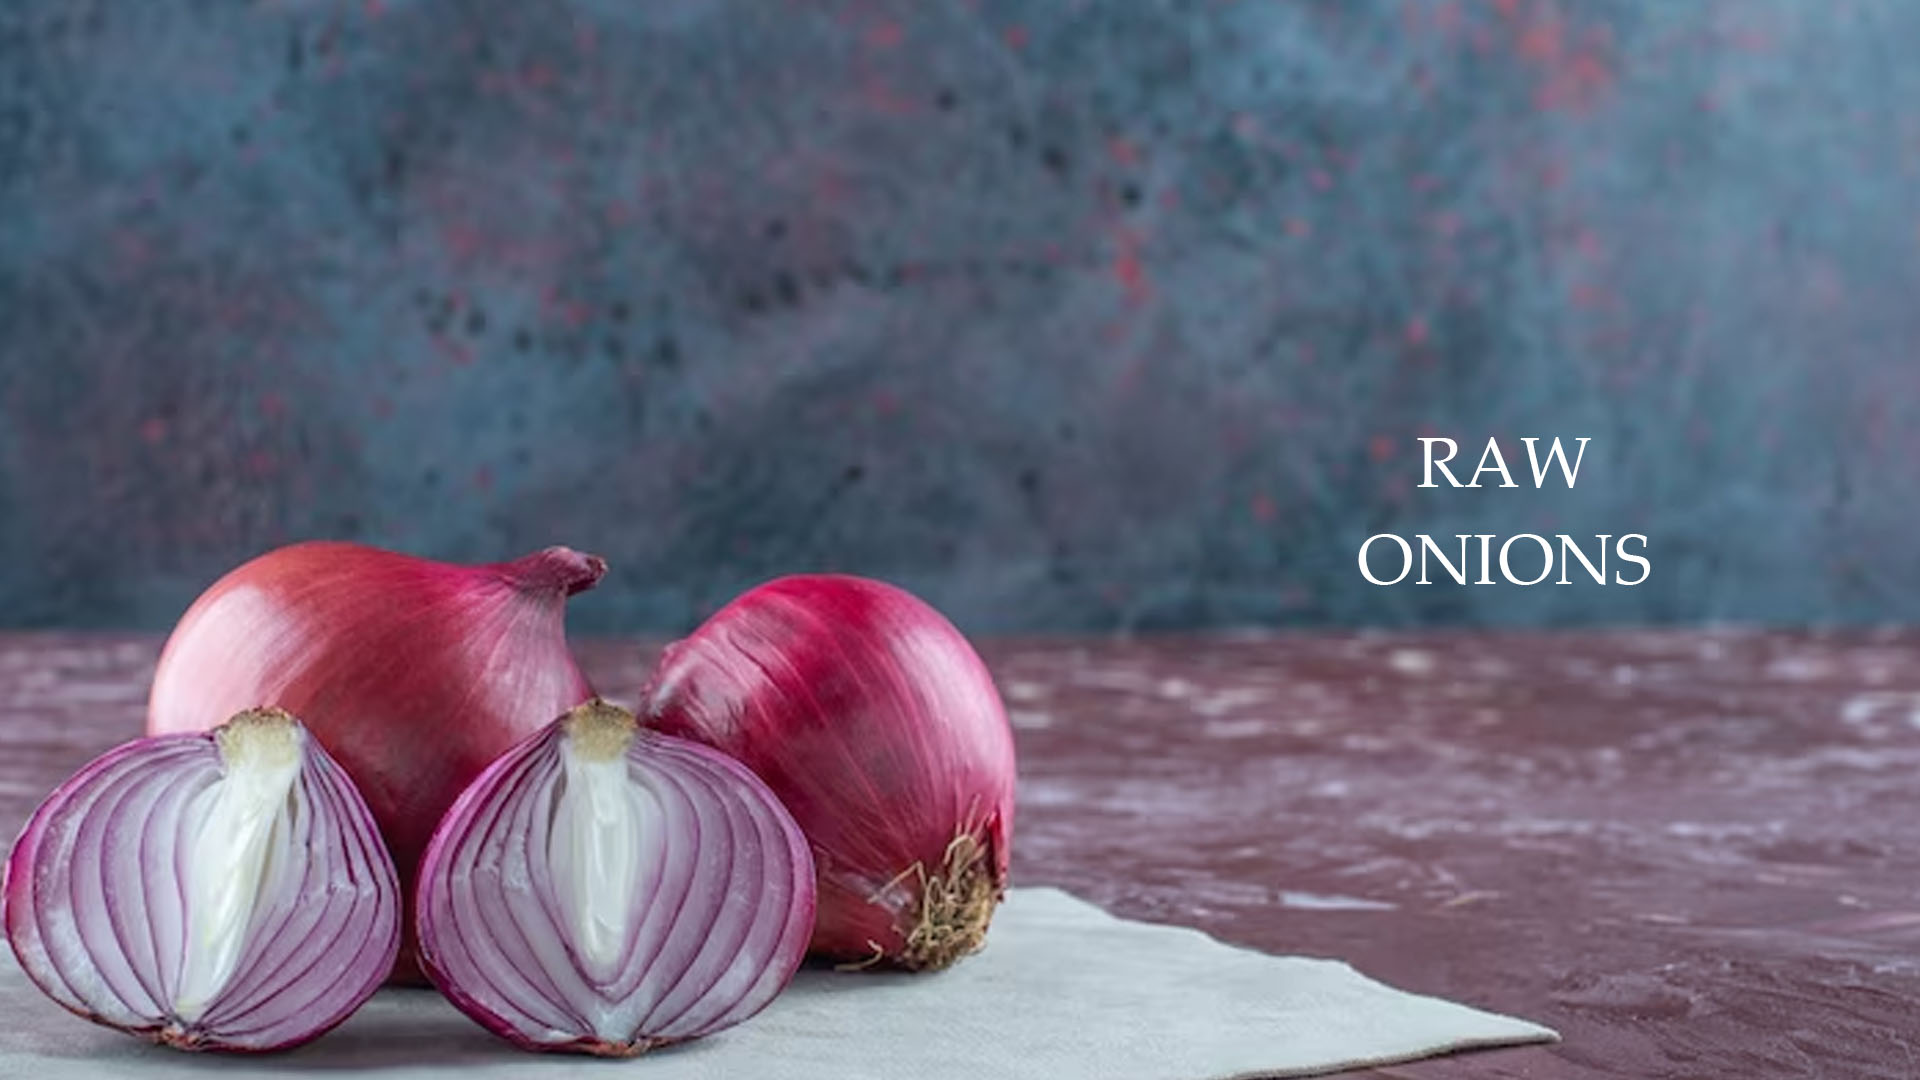 Do Raw Onions Have Health Benefits?